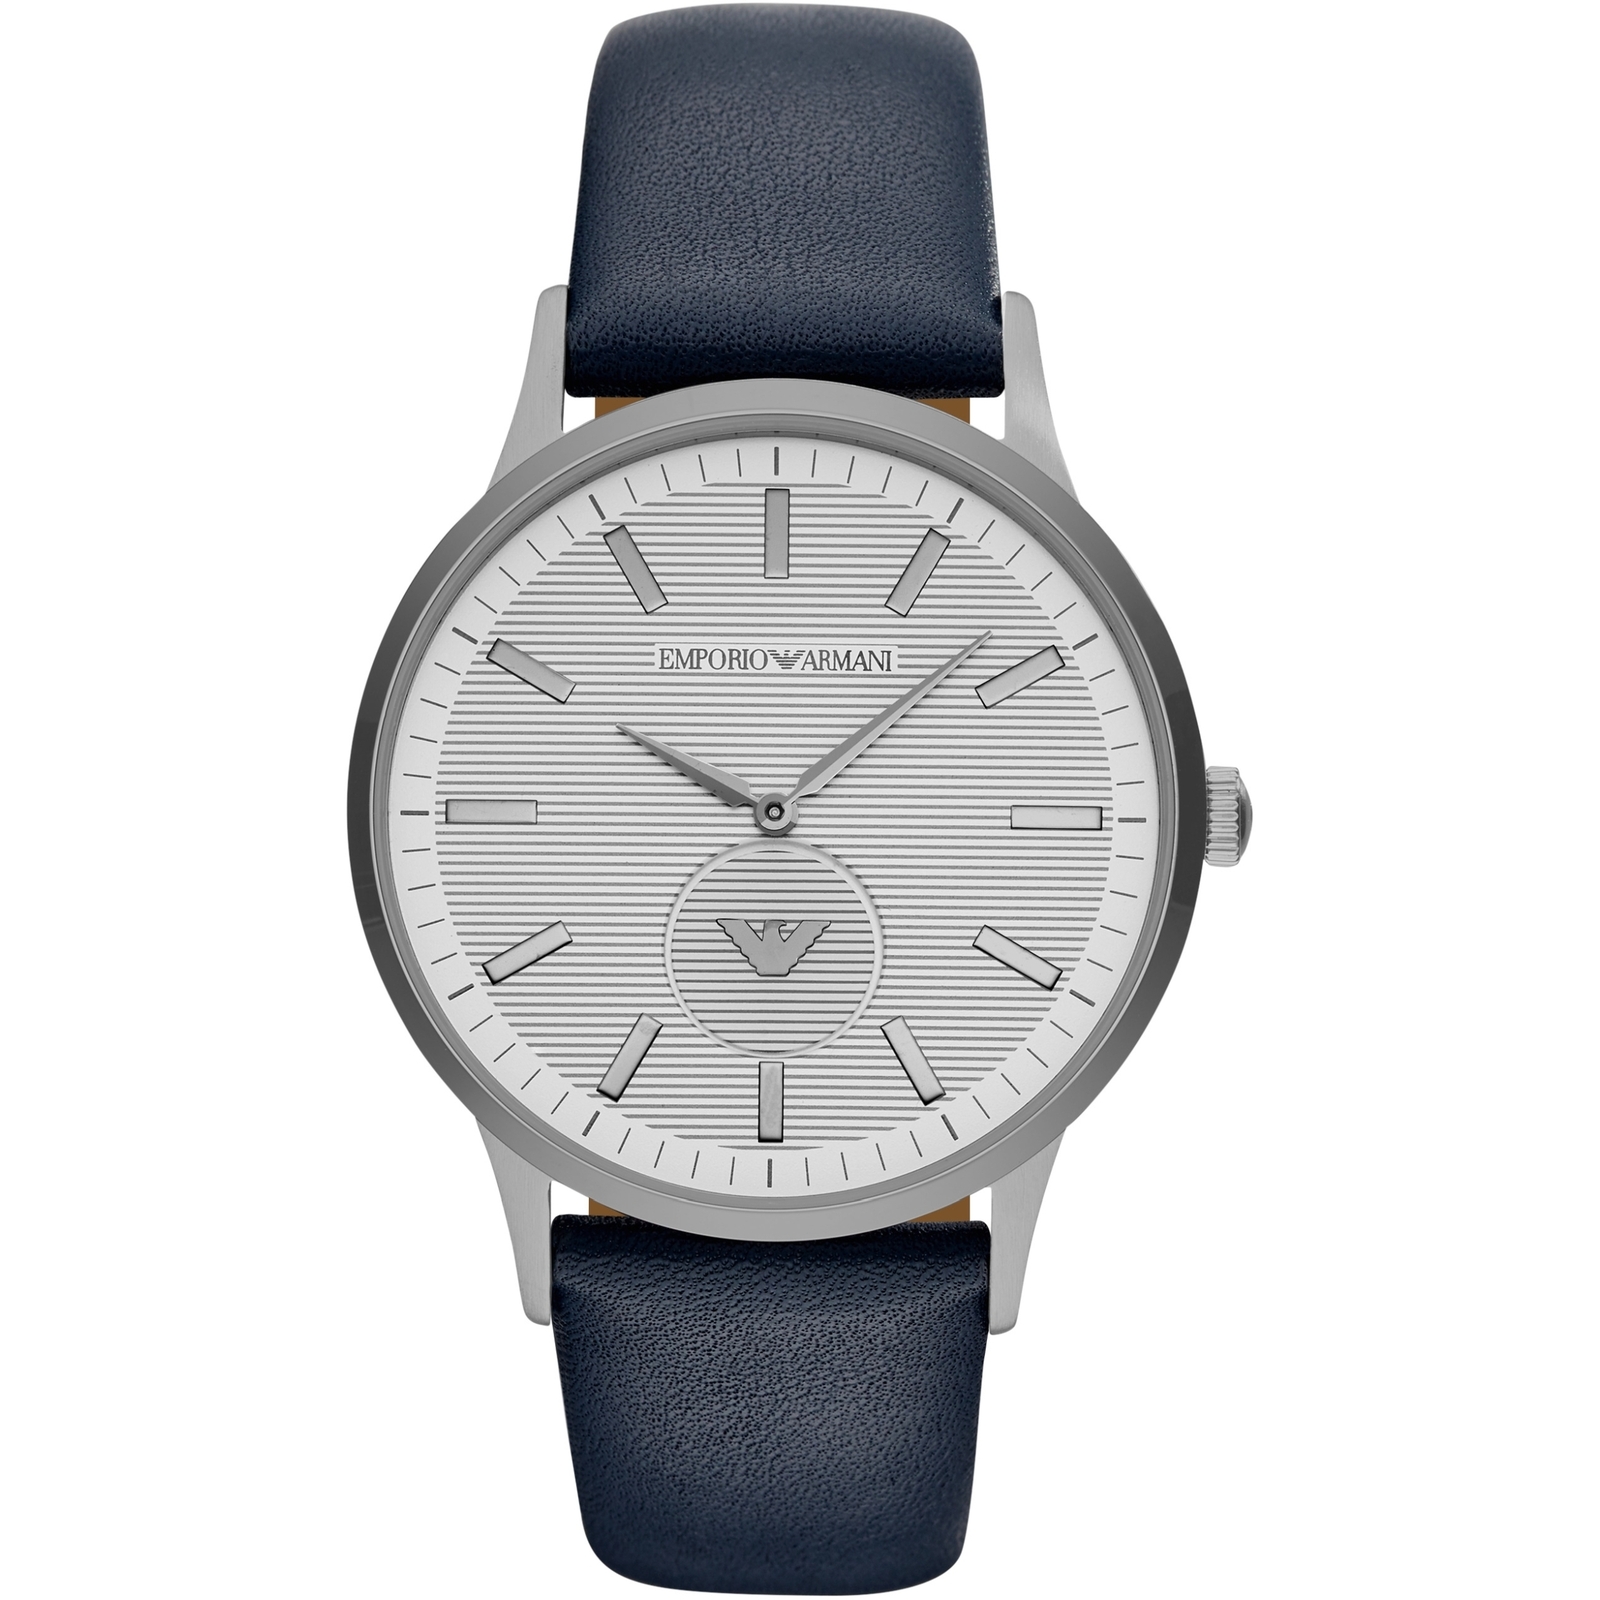 Primary image for Emporio Armani AR11119 Blue Leather Strap Steel Case Men’s Watch